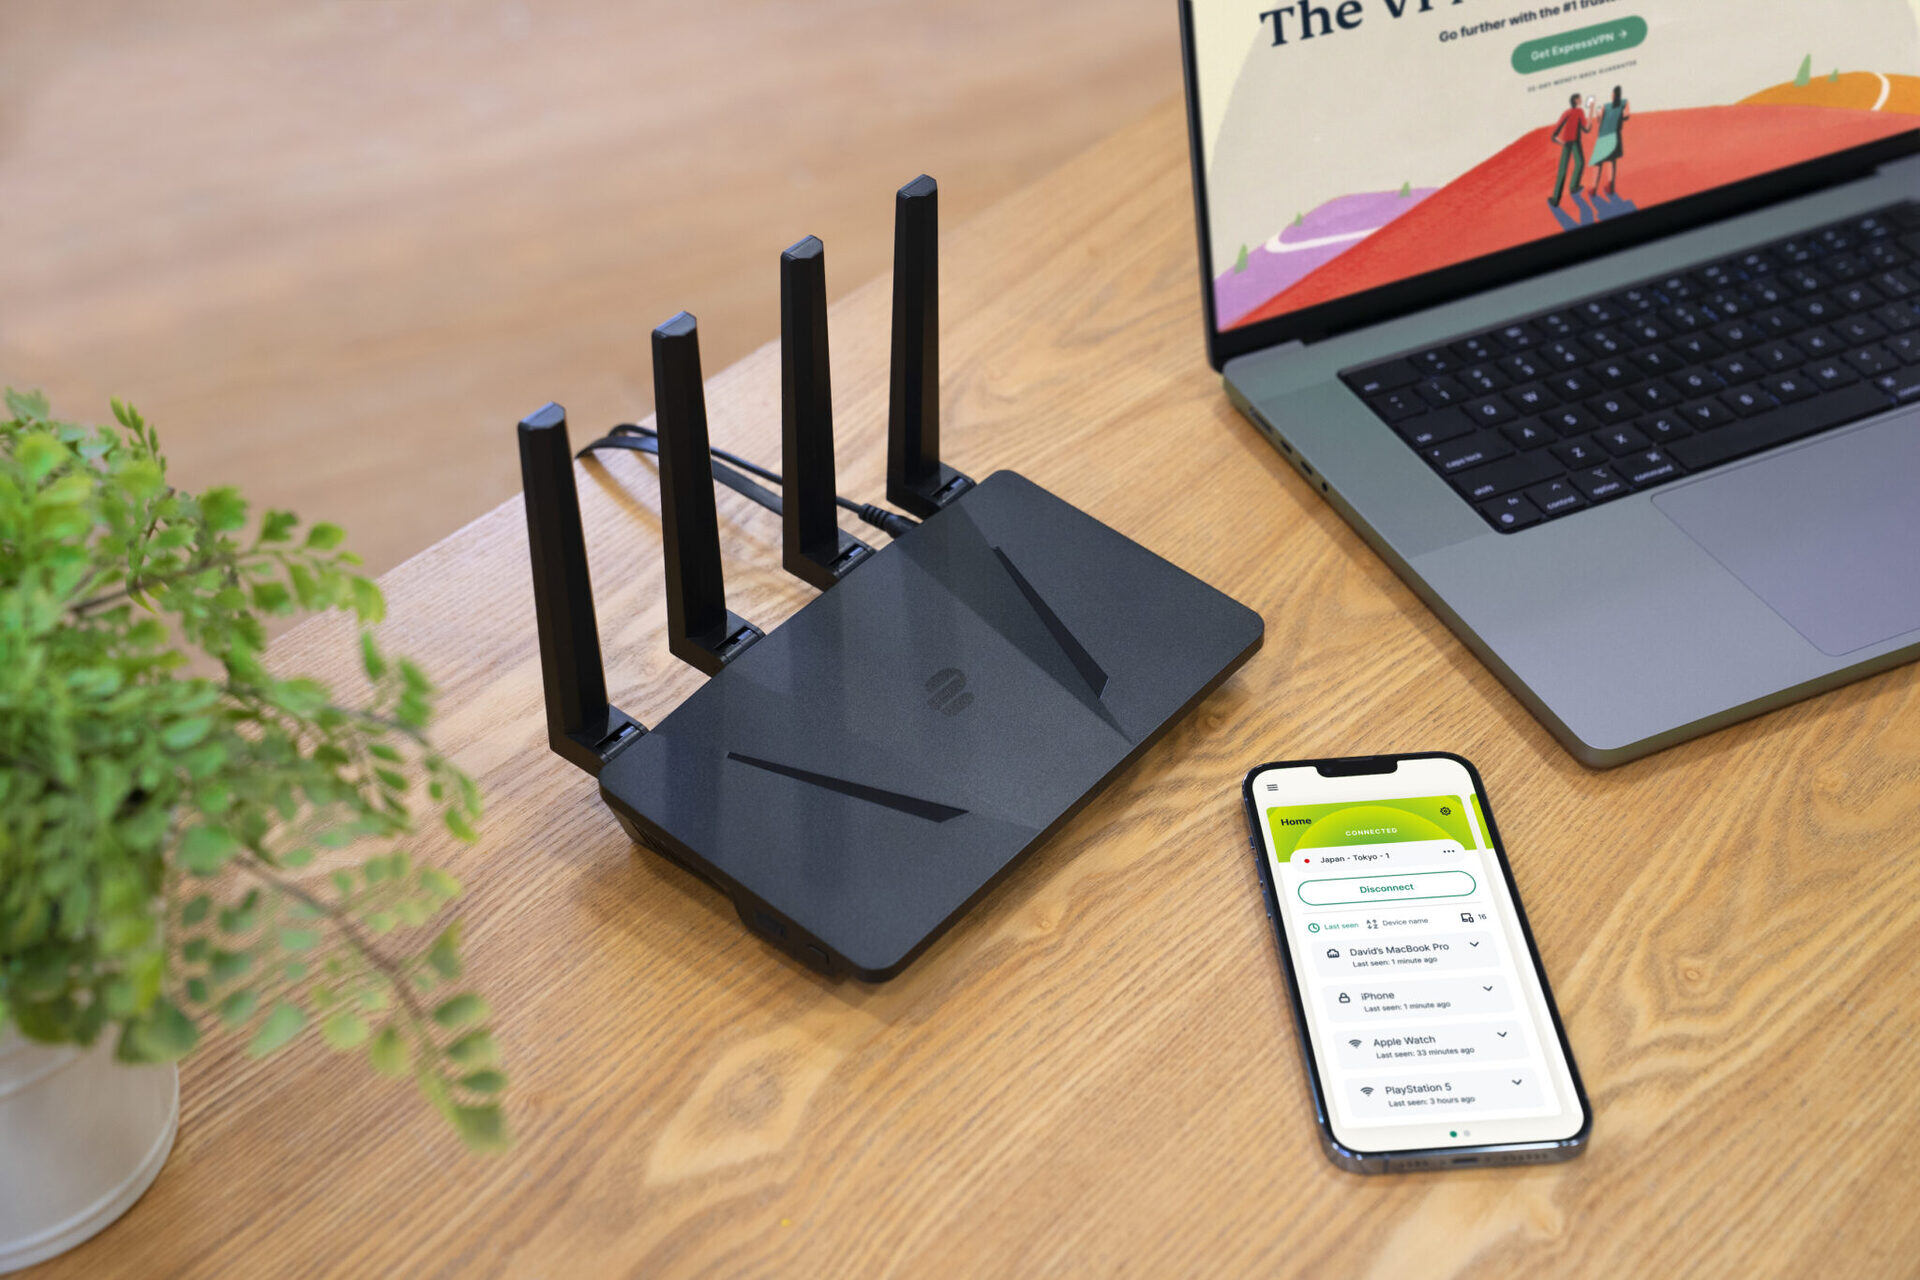 How To Control Wi-Fi Router From Android Phone